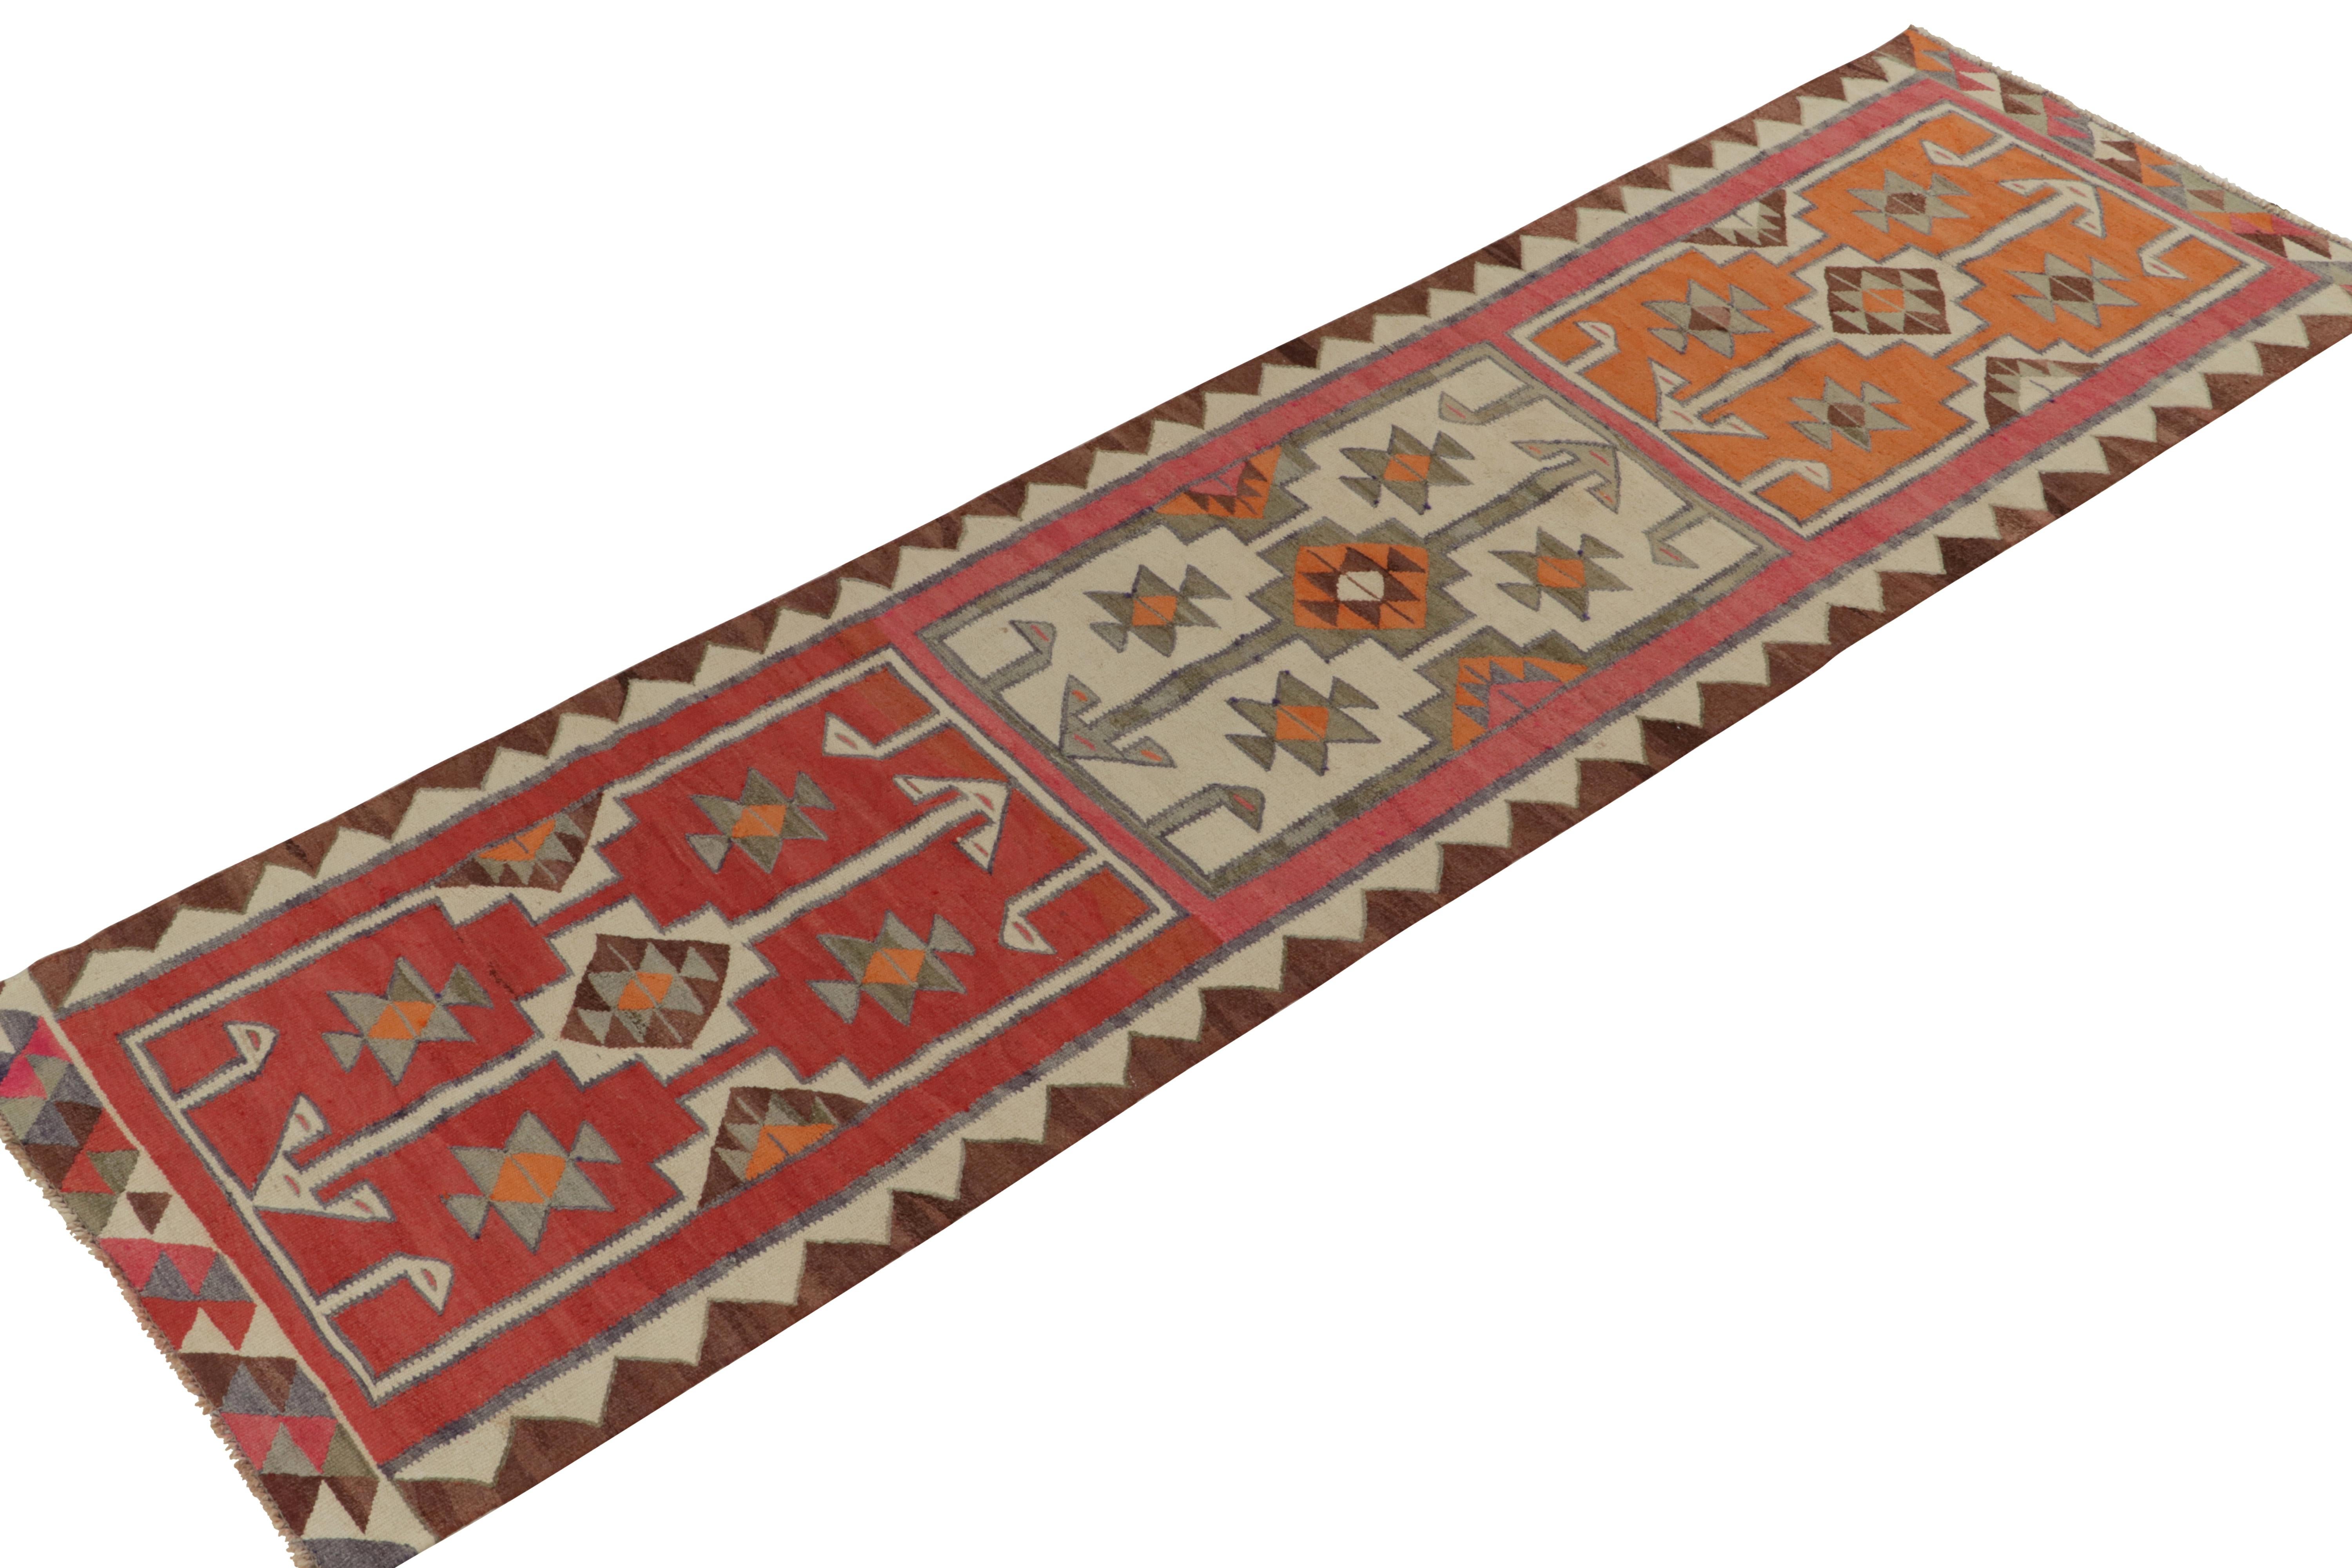 From R&K Principal Josh Nazmiyal’s latest acquisitions, a distinguished 3x11 vintage kilim runner originating from Turkey circa 1950-1960. 

On the Design: 

The exceptional tribal geometric patterns enjoy a scintillating movement in the warmth &